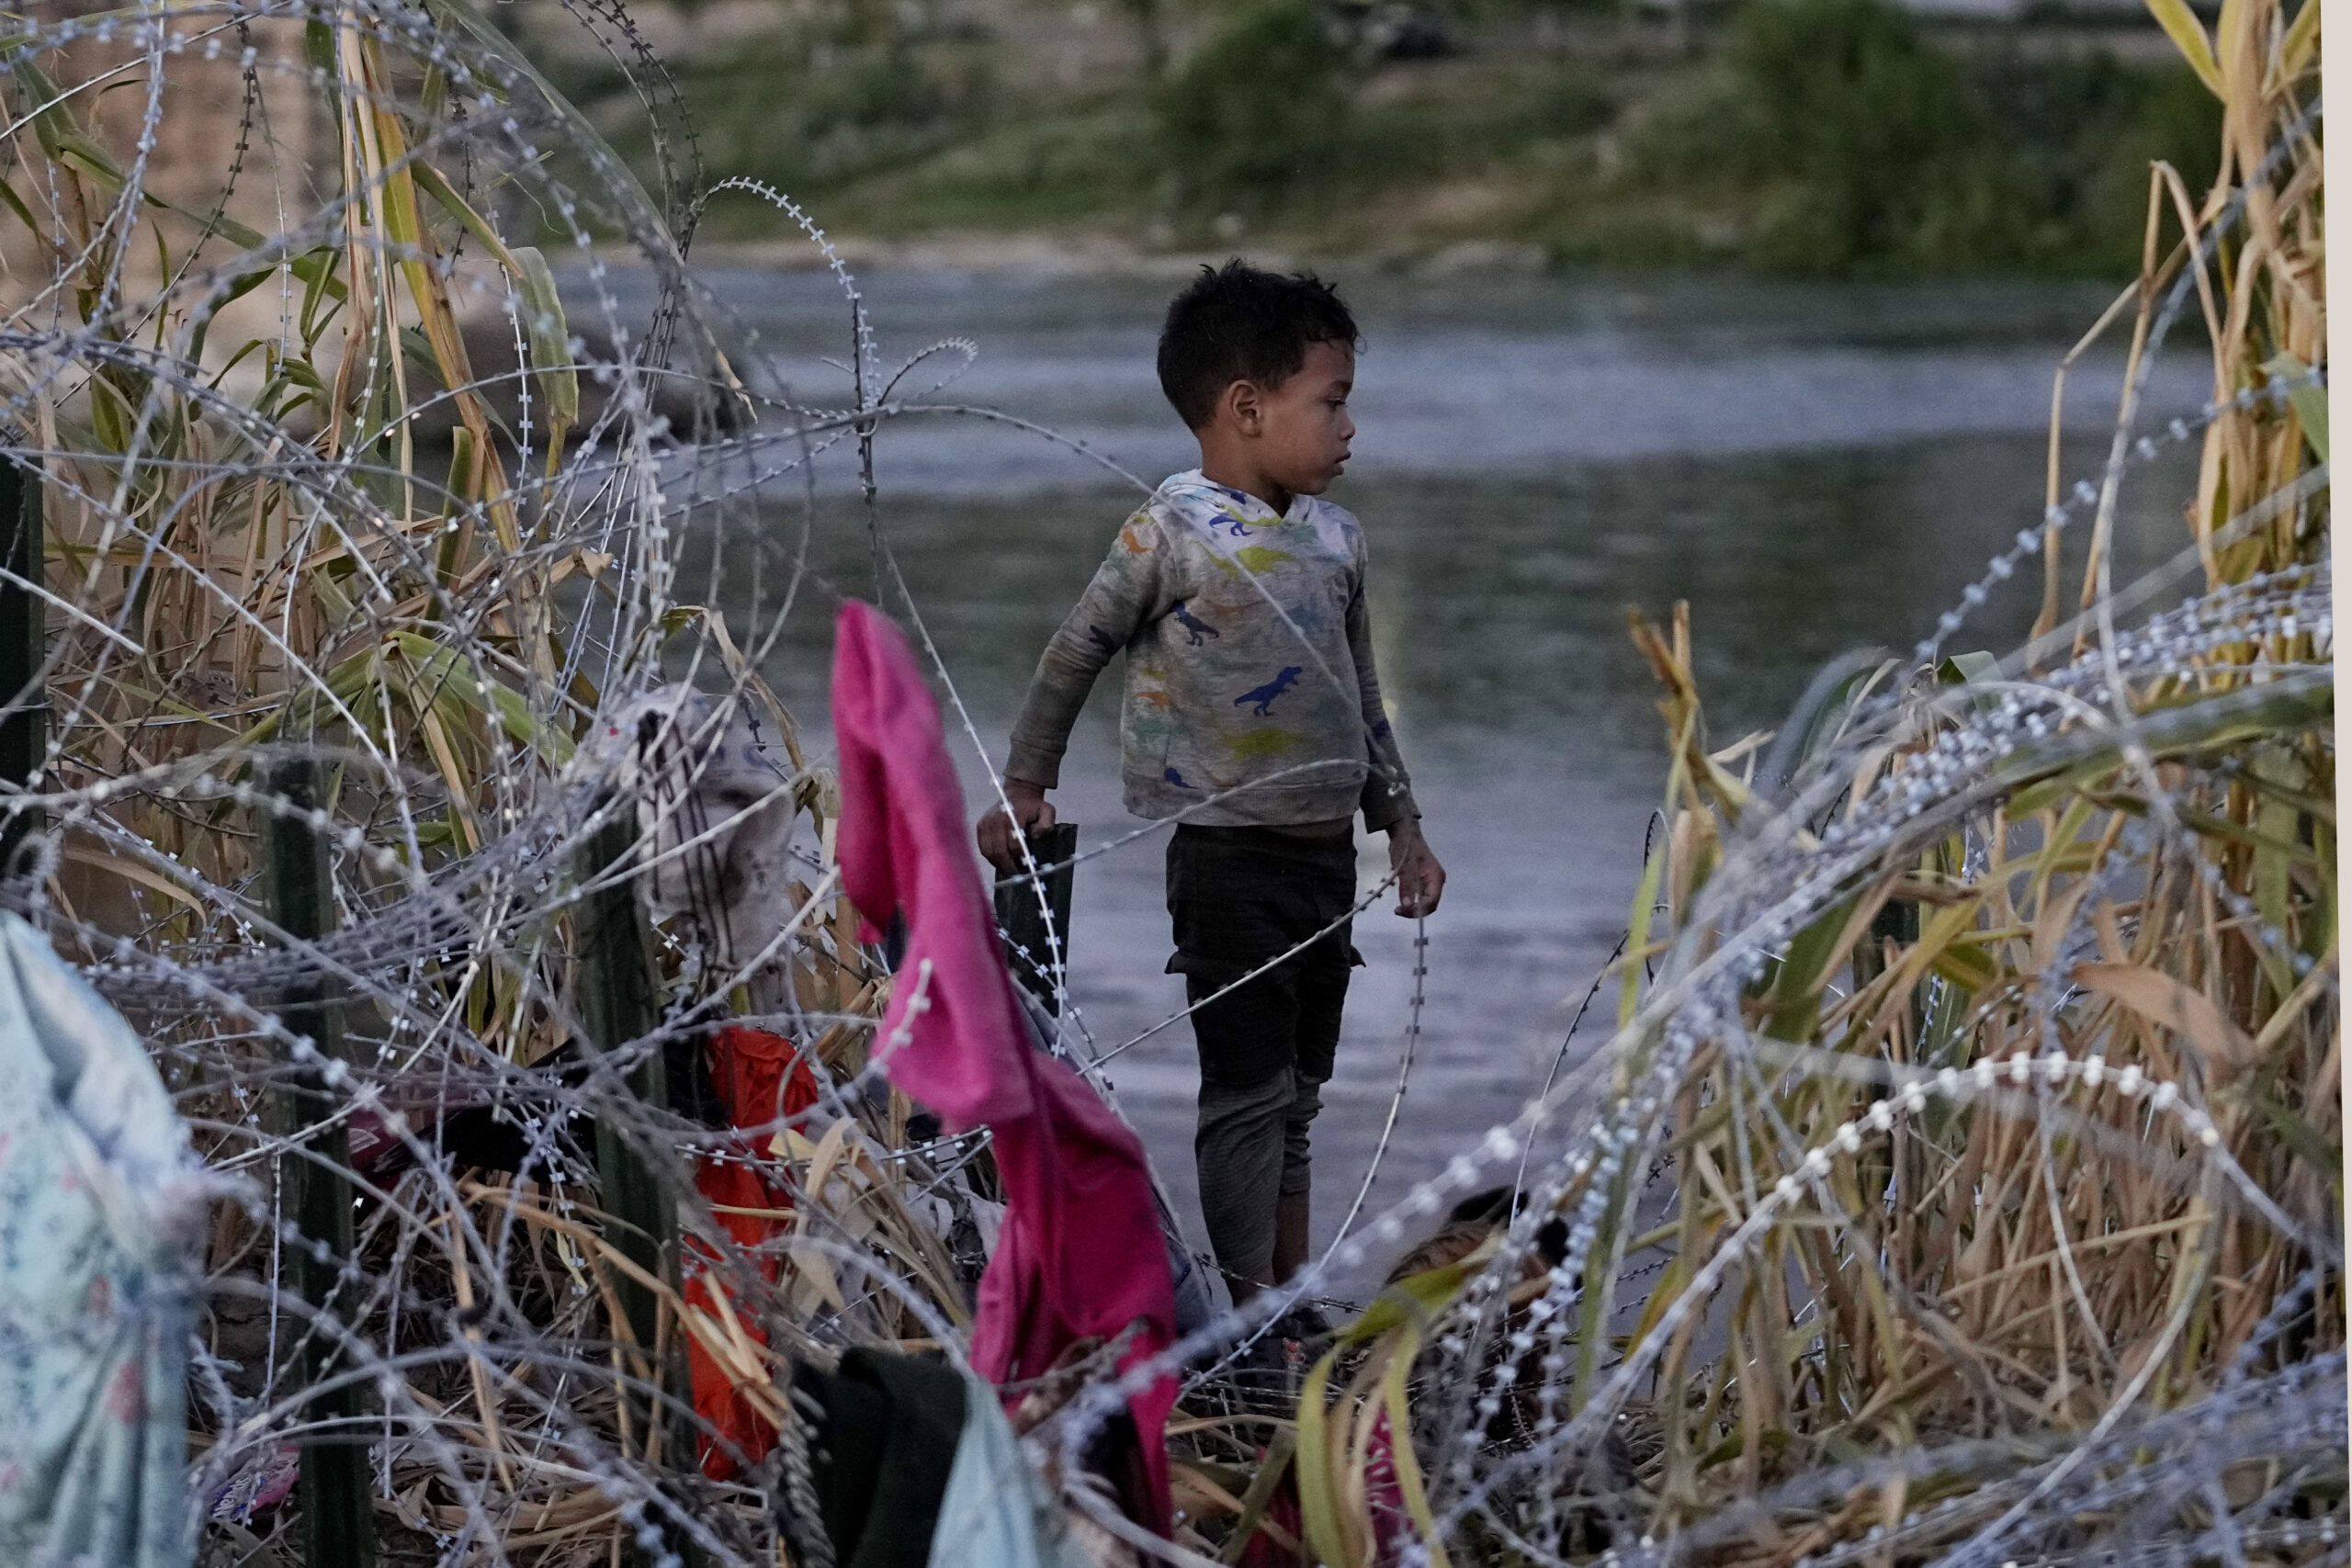 they-rescue-8-immigrant-children-abandoned-on-a-raft-in-the-rio-grande